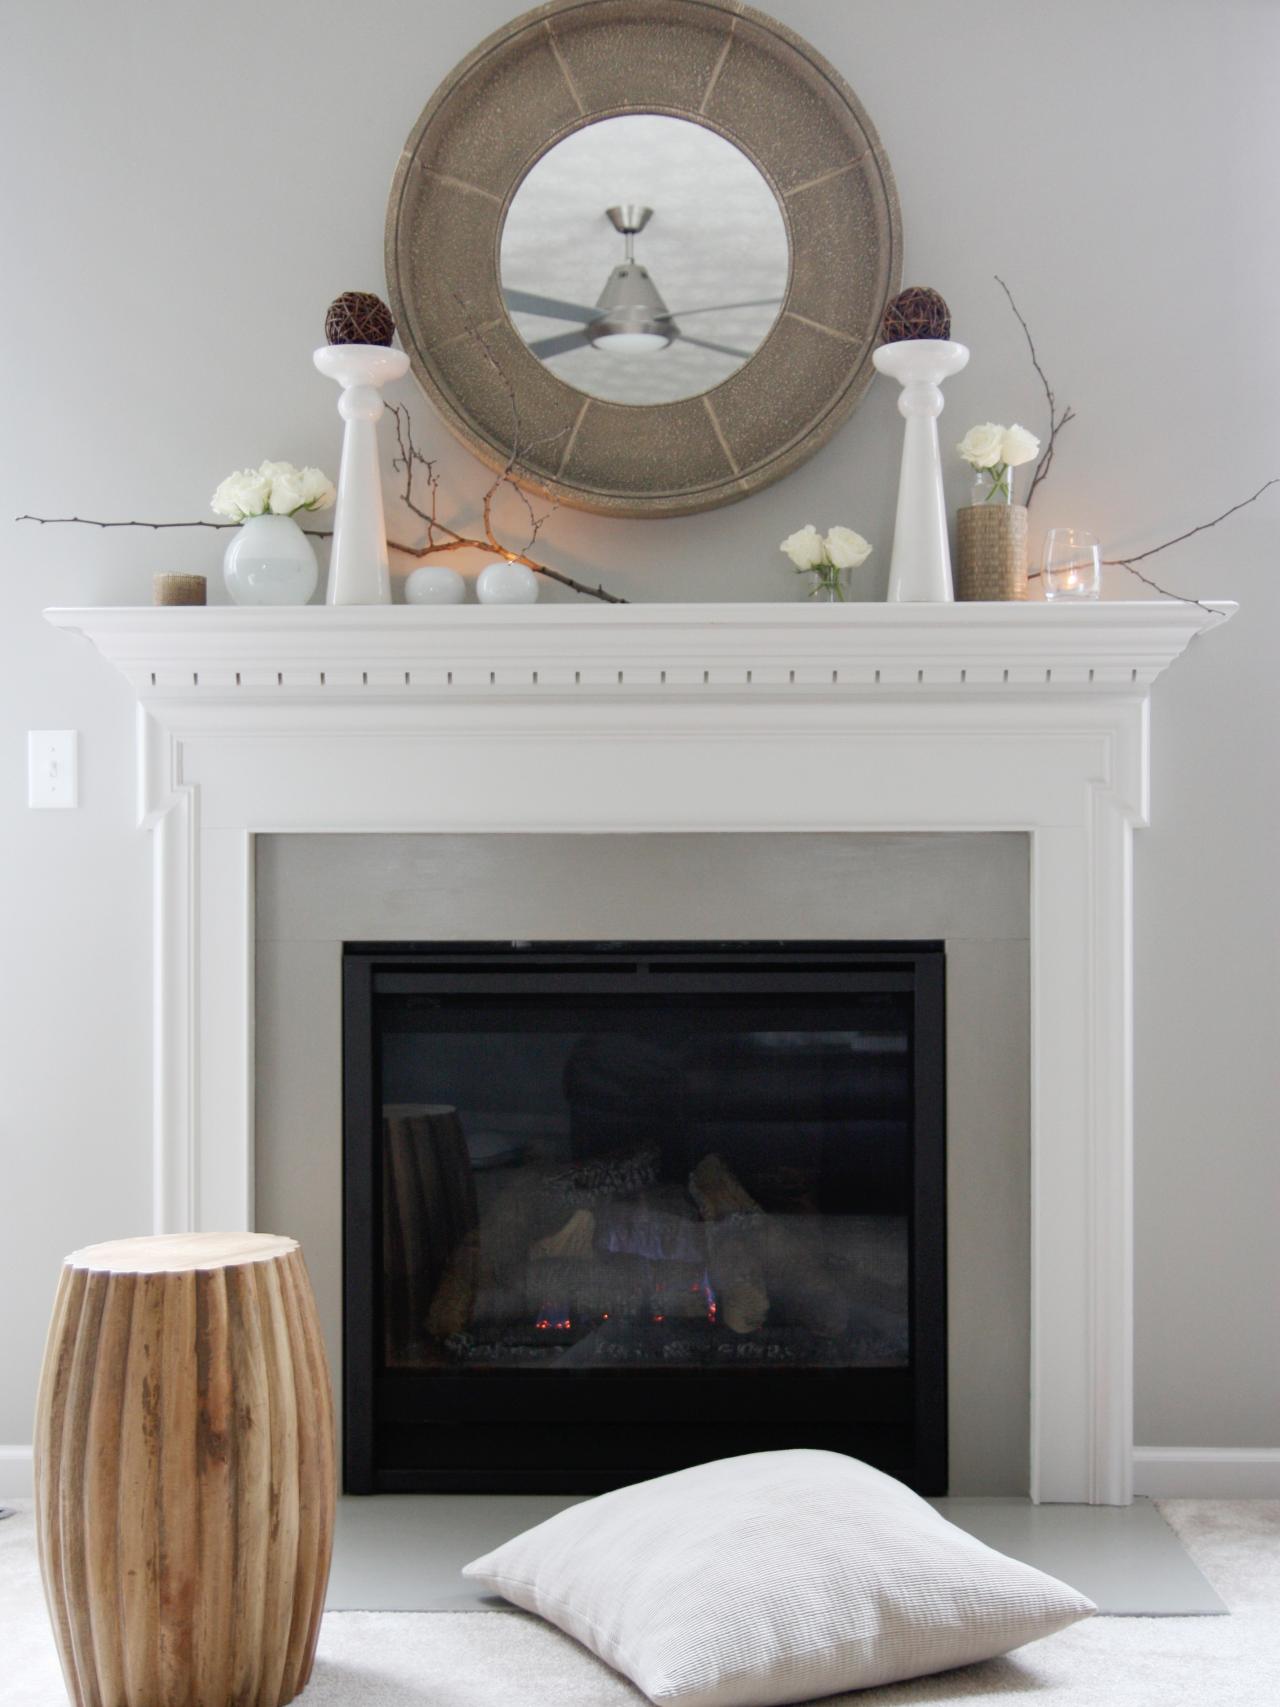 The design experts at HGTV.com share 15 tips for decorating your mantel no matter the season.